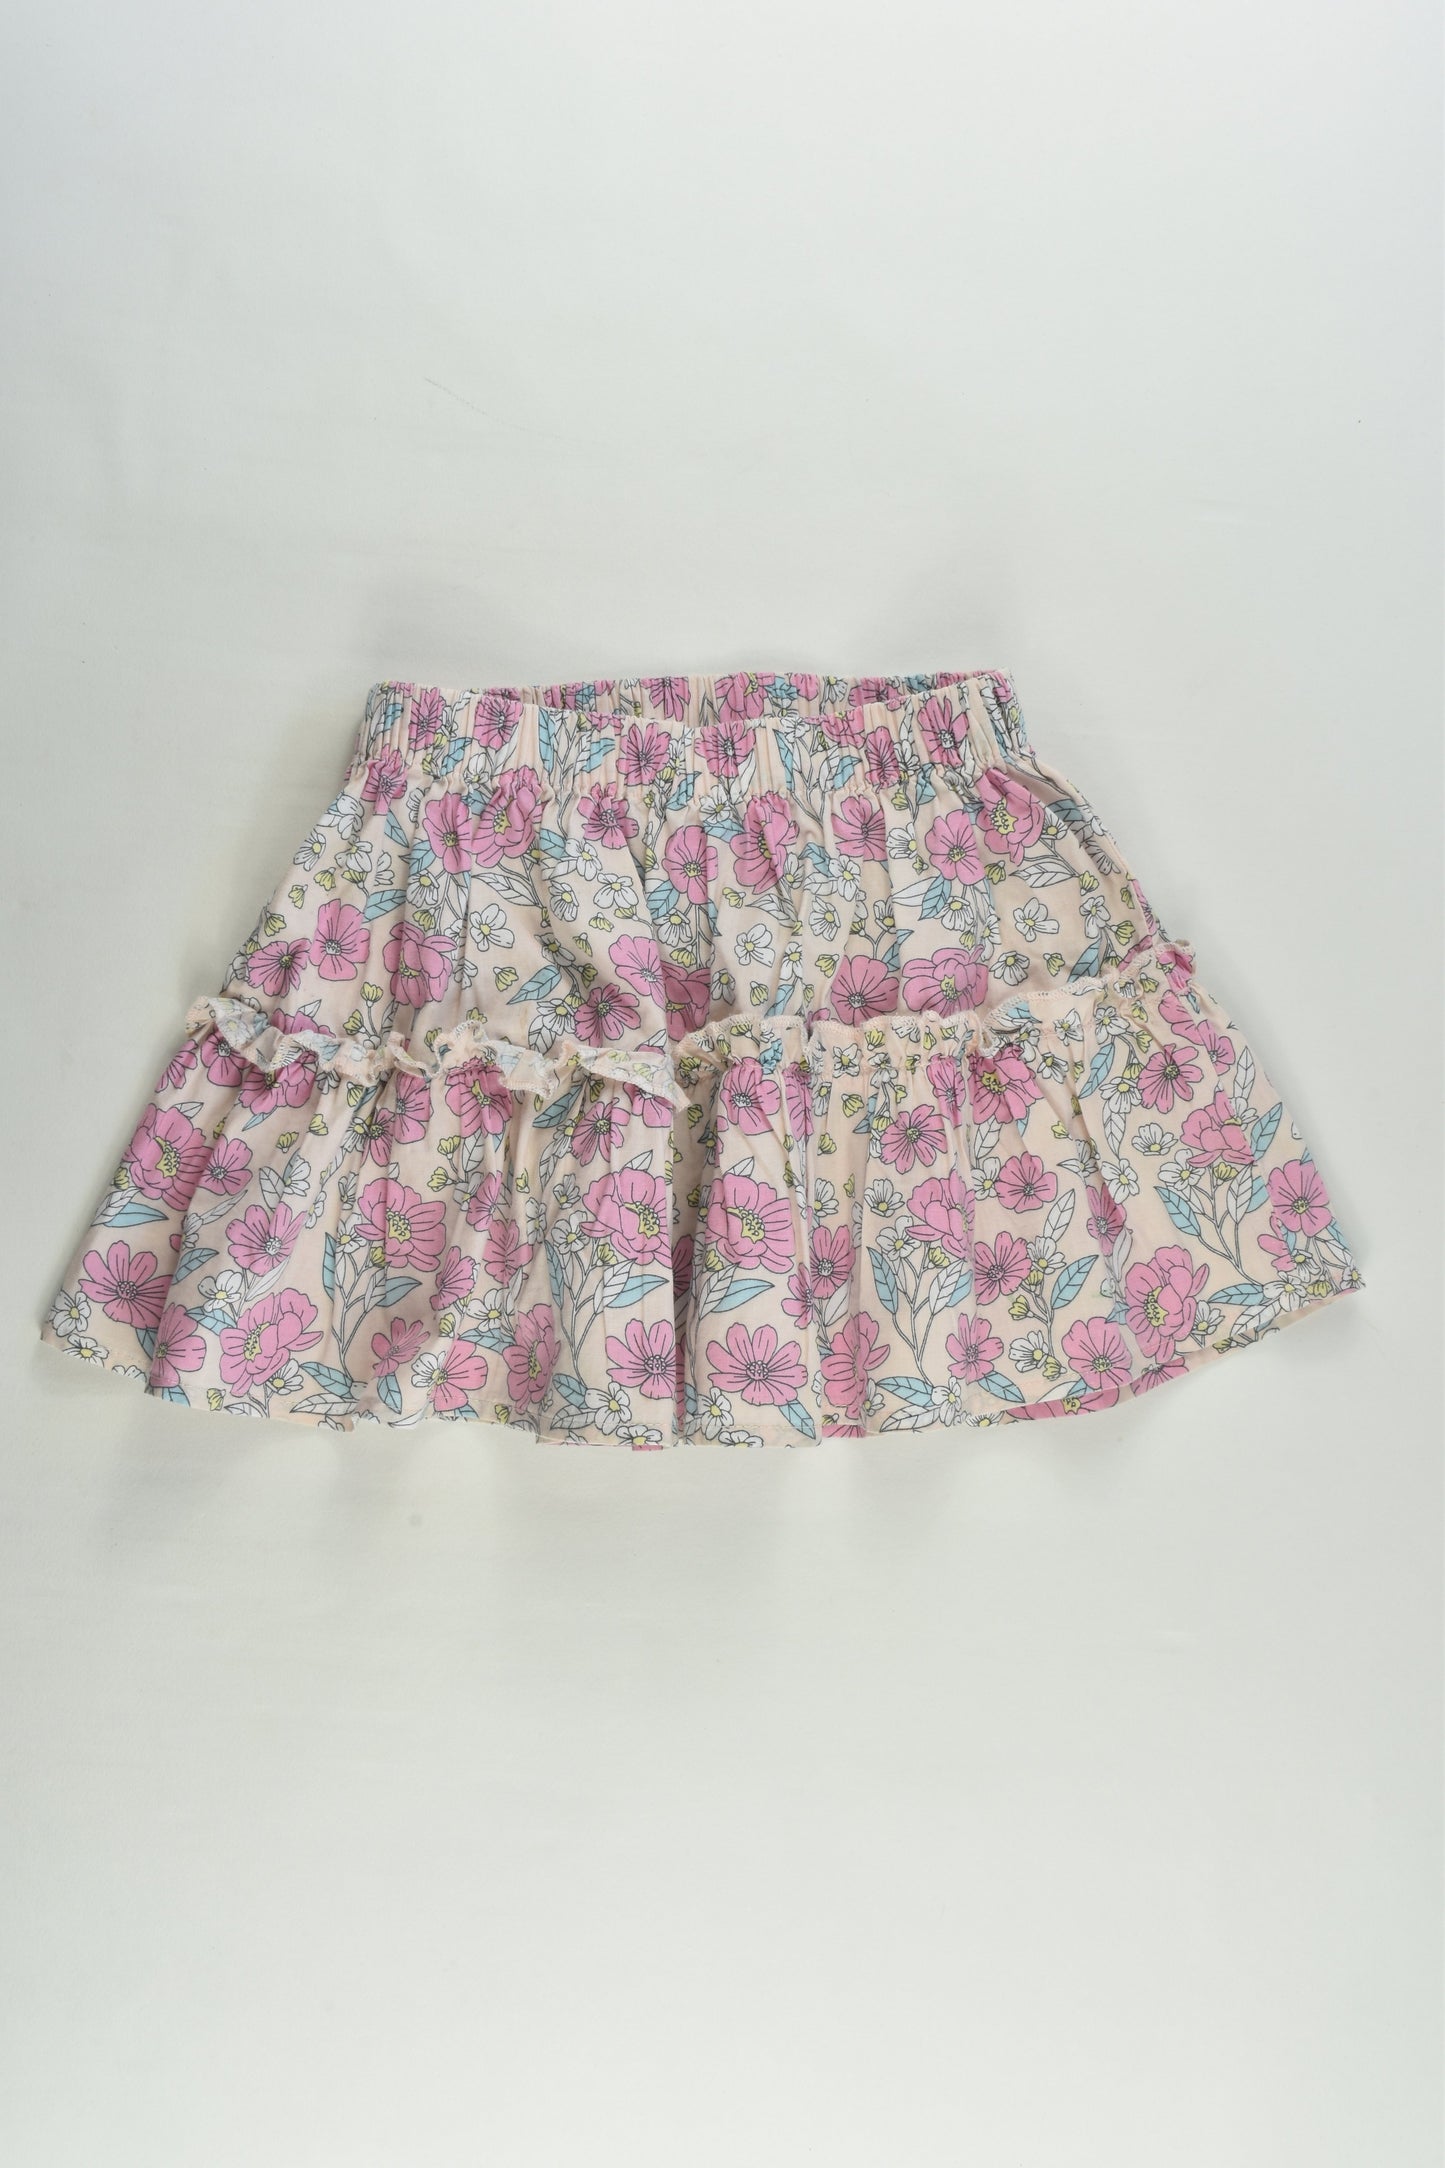 Anko Size 2 Floral Skirt